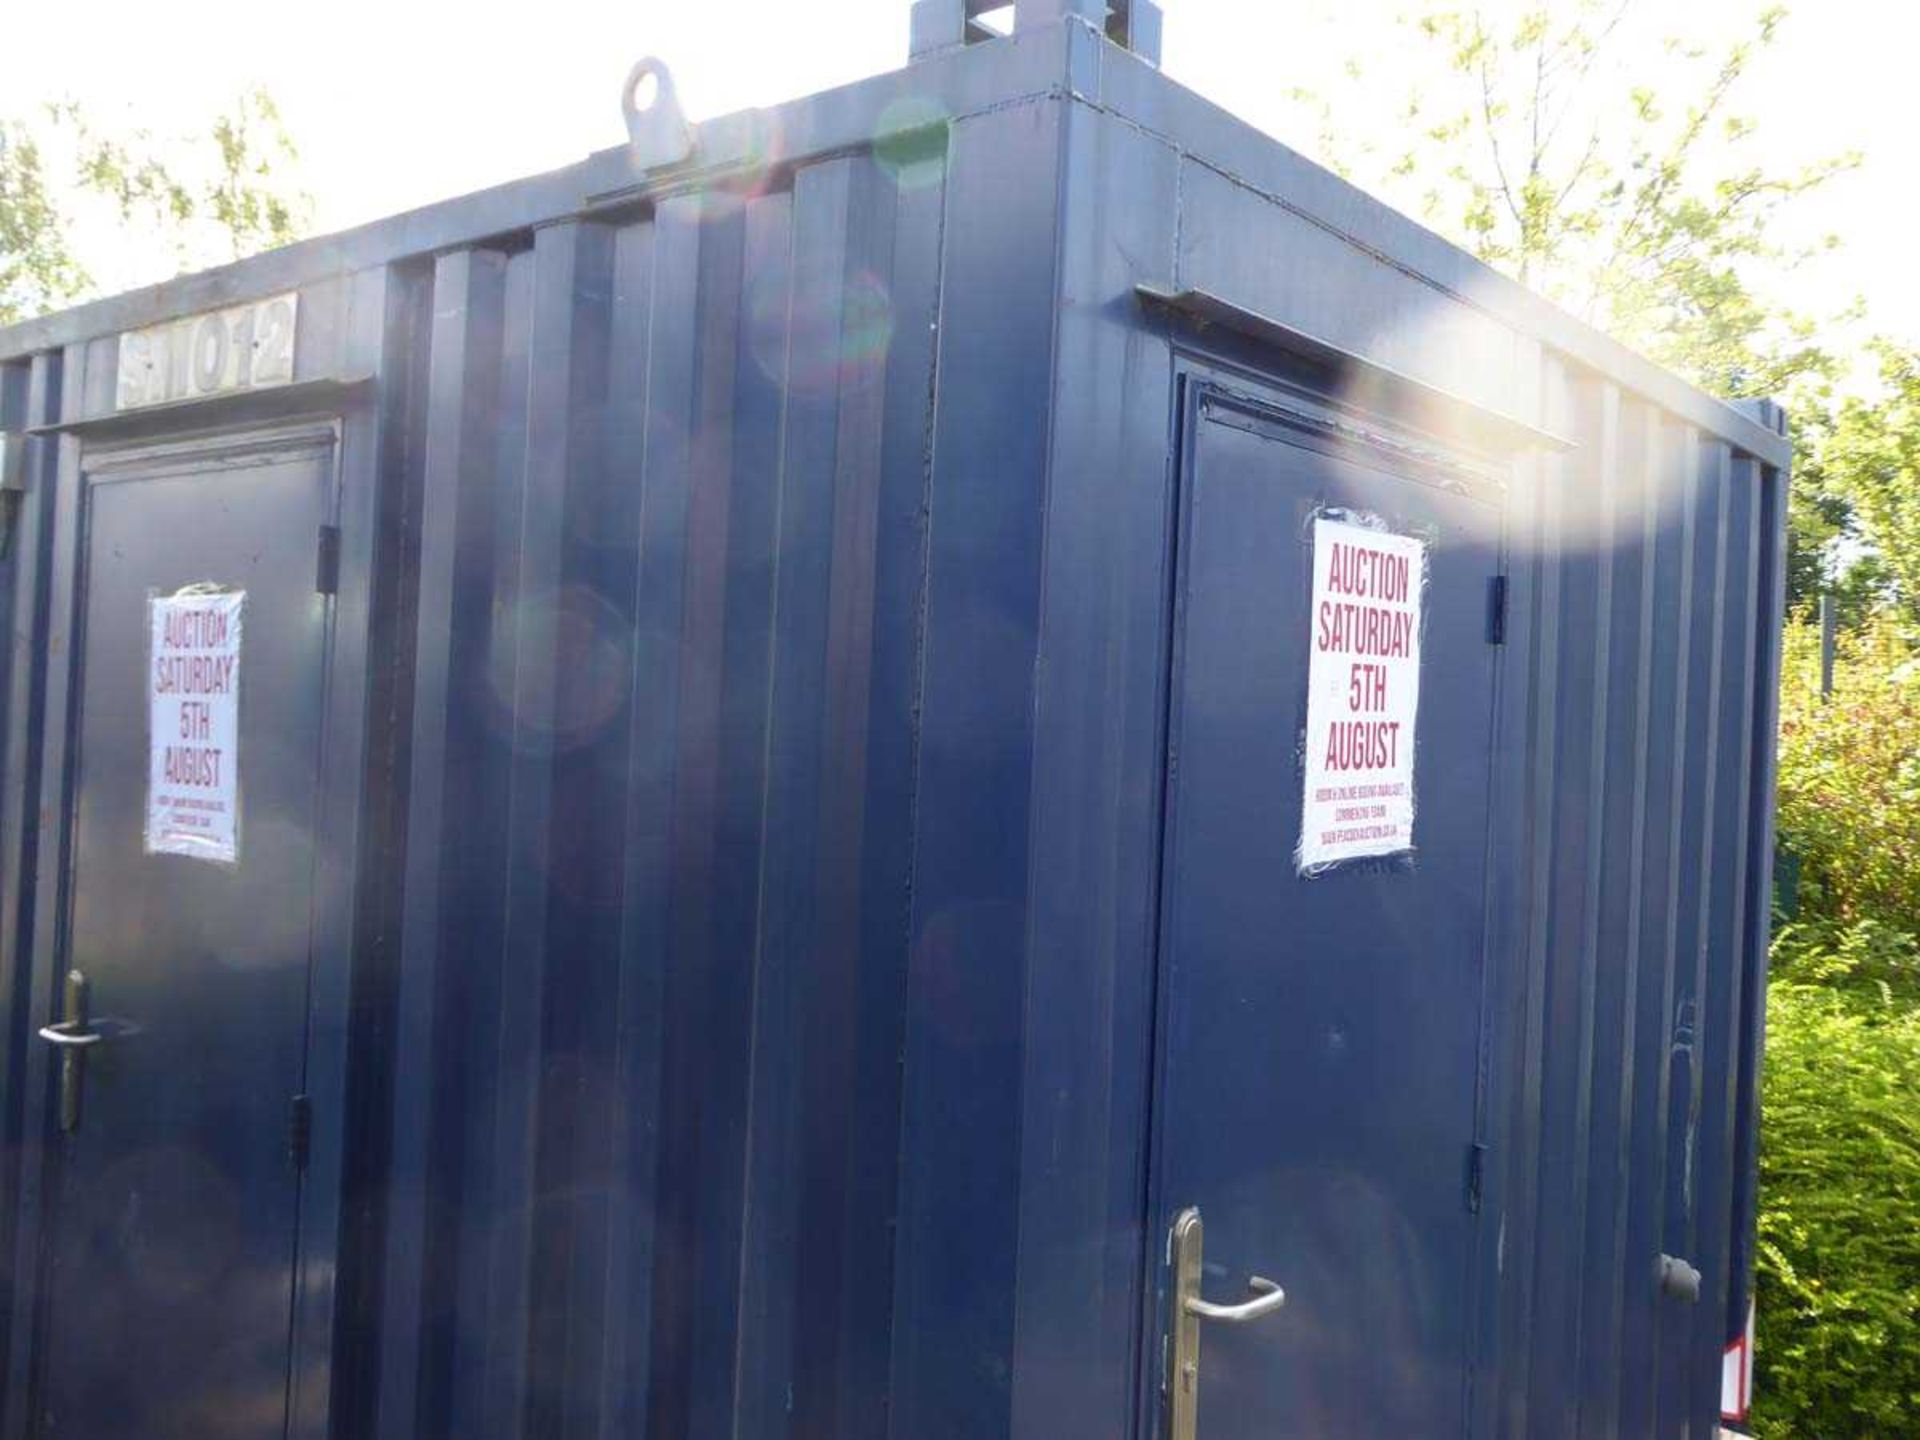 12ft x 9ft toilet block in corrugated steel toilet block in corrugated steel with men's 2 cubicle/ - Image 2 of 5